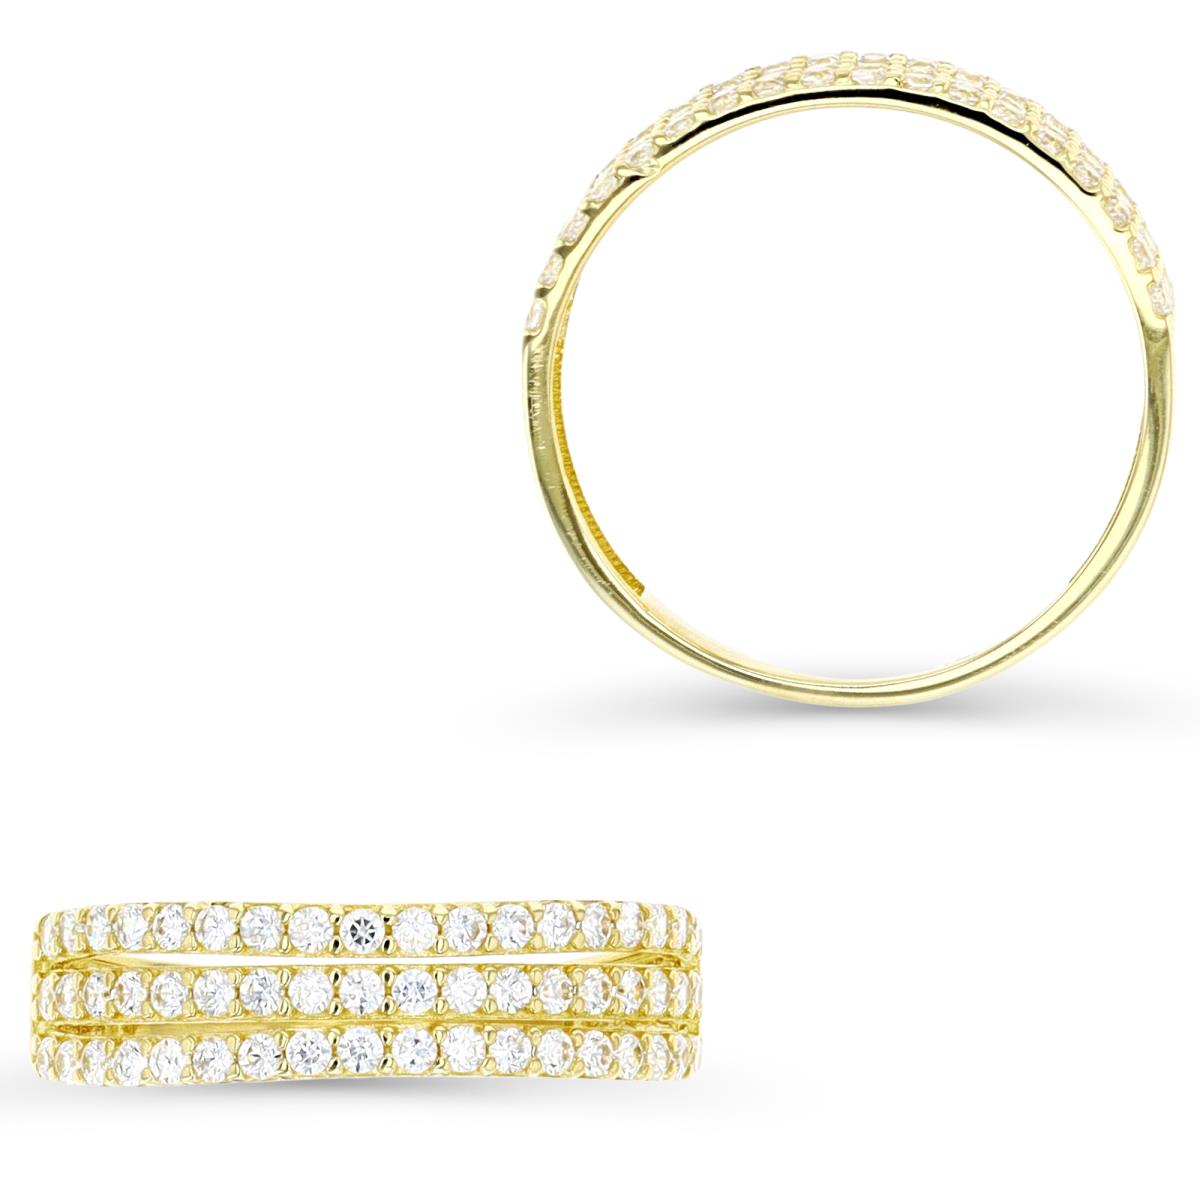 10K Yellow Gold Pave 3-Row CZ Ring